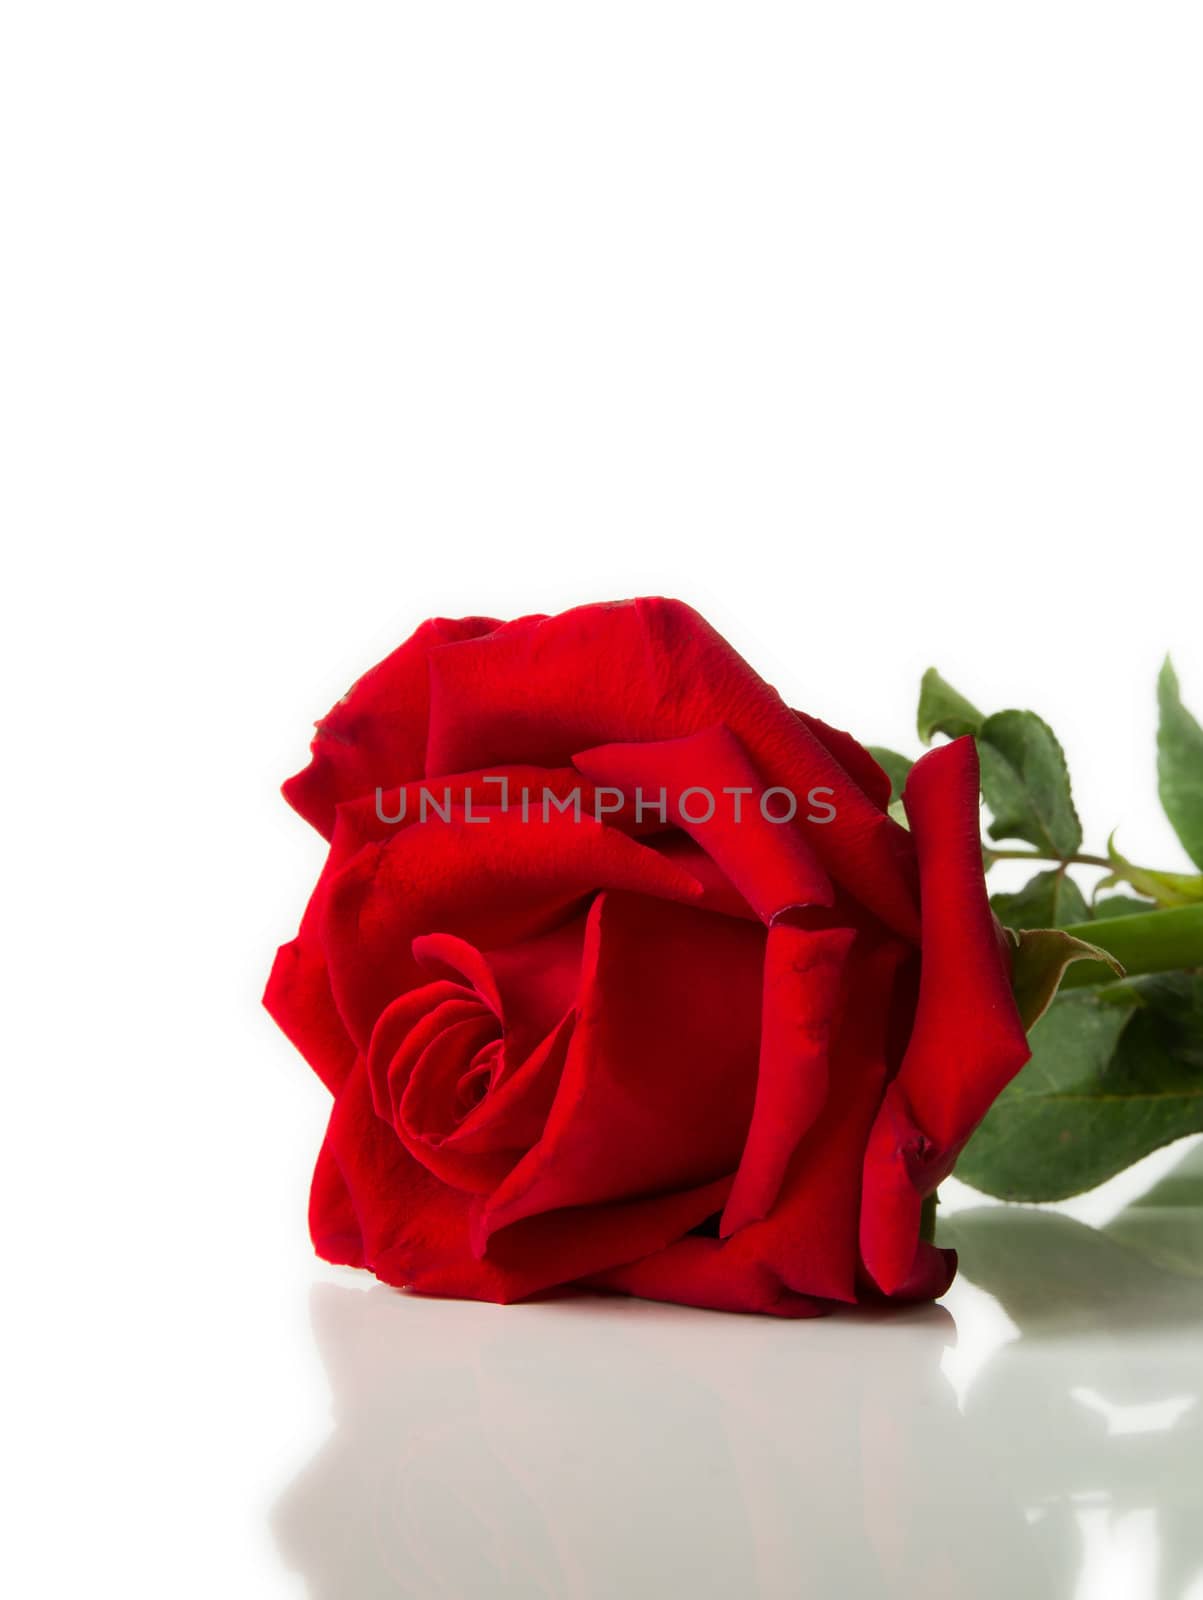 Red rose laying on White background by nuttakit